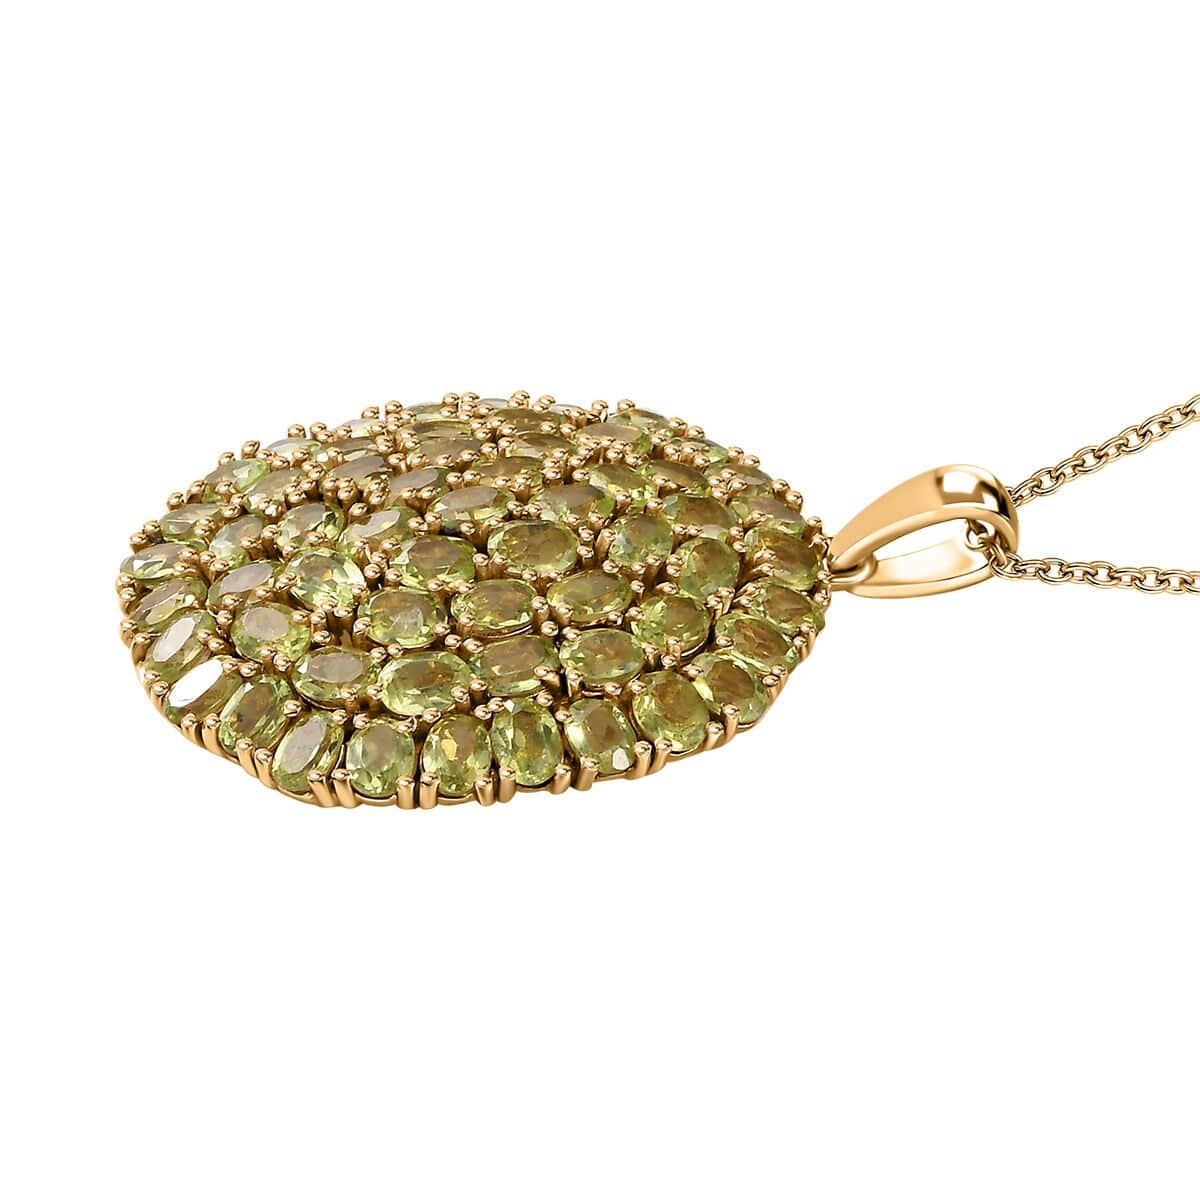 Buy Karis Peridot Cluster Pendant in 18K YG Plated with Stainless